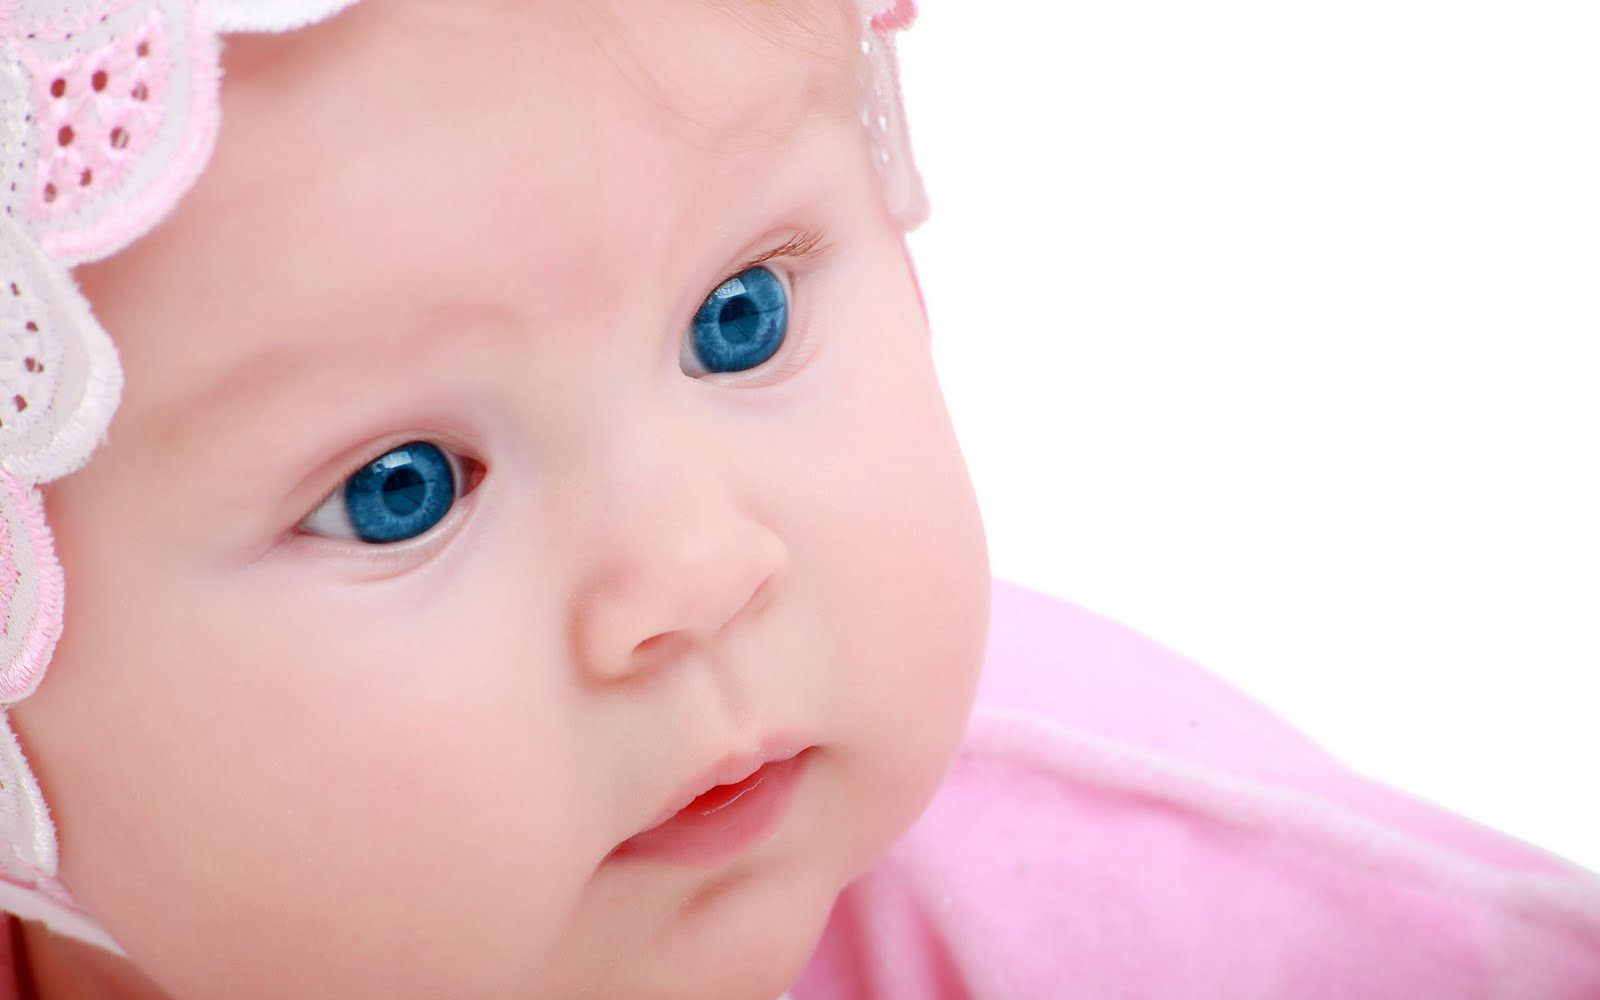  girl in pink clothes and bright blue eyes Beautiful Baby Wallpapers